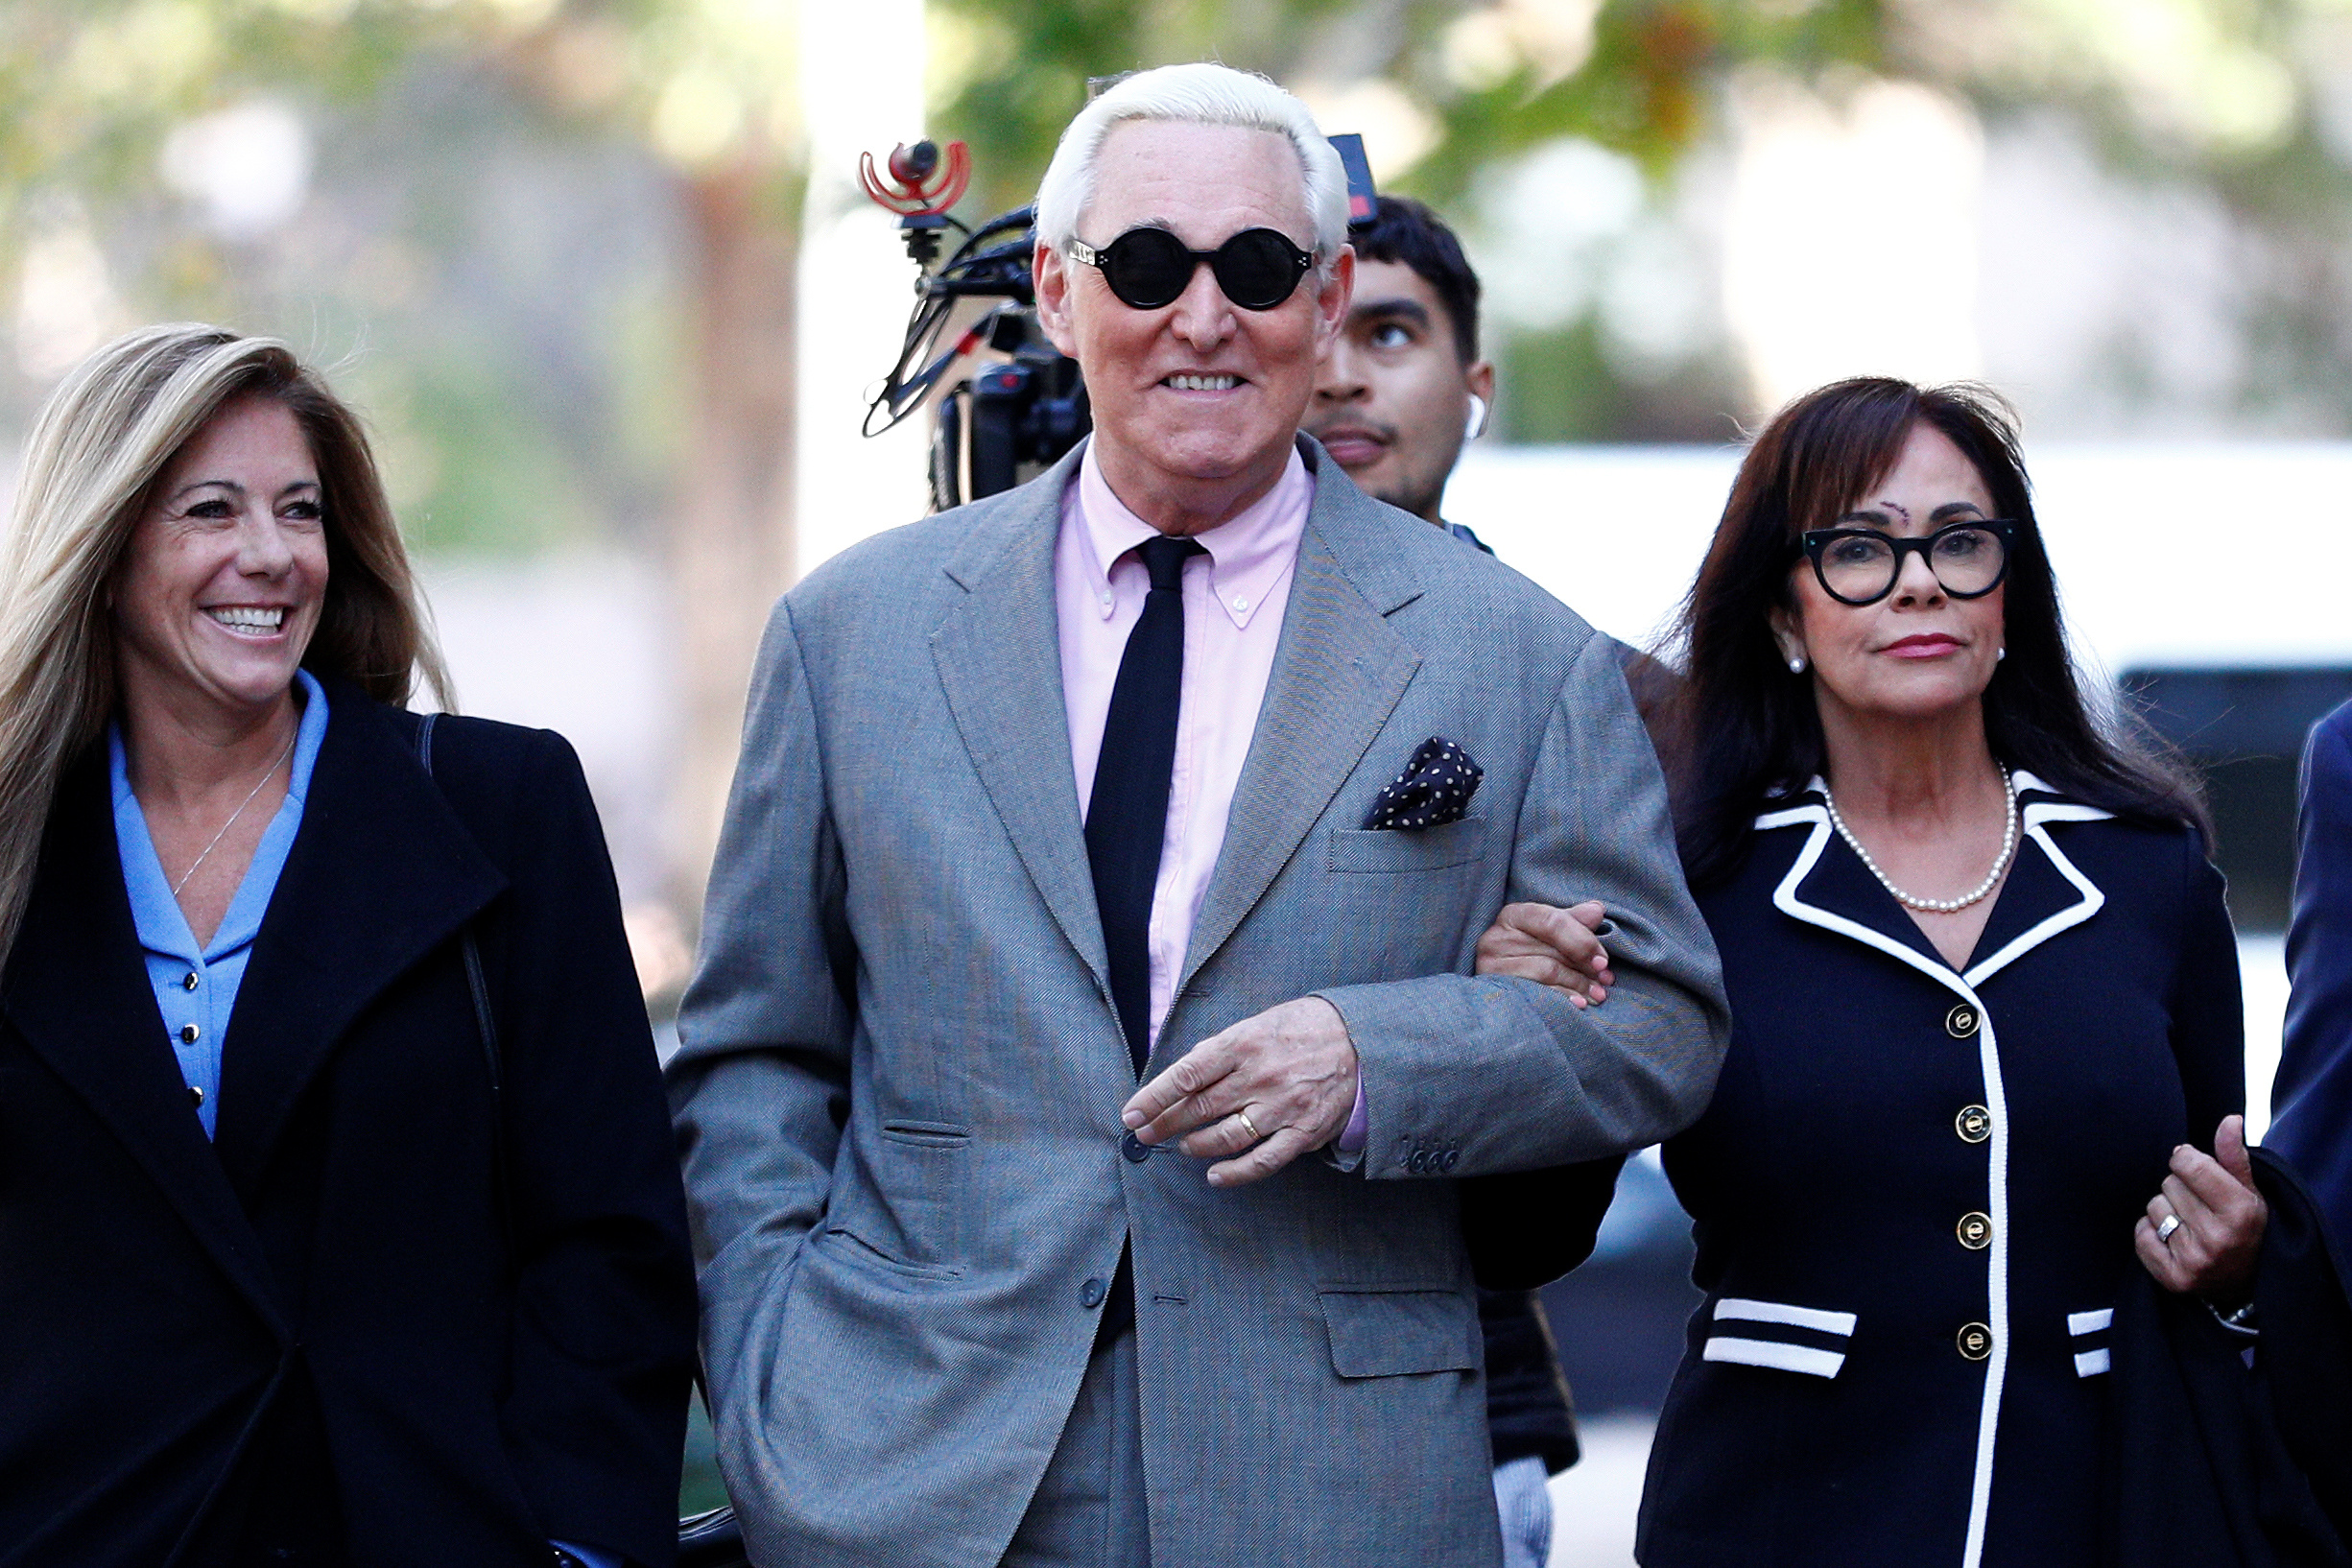 PHOTO: Roger Stone, former campaign adviser to President Donald Trump, arrives for the start of his criminal trial on charges of lying to Congress, obstructing justice and witness tampering at U.S. District Court in Washington, Nov. 5, 2019.